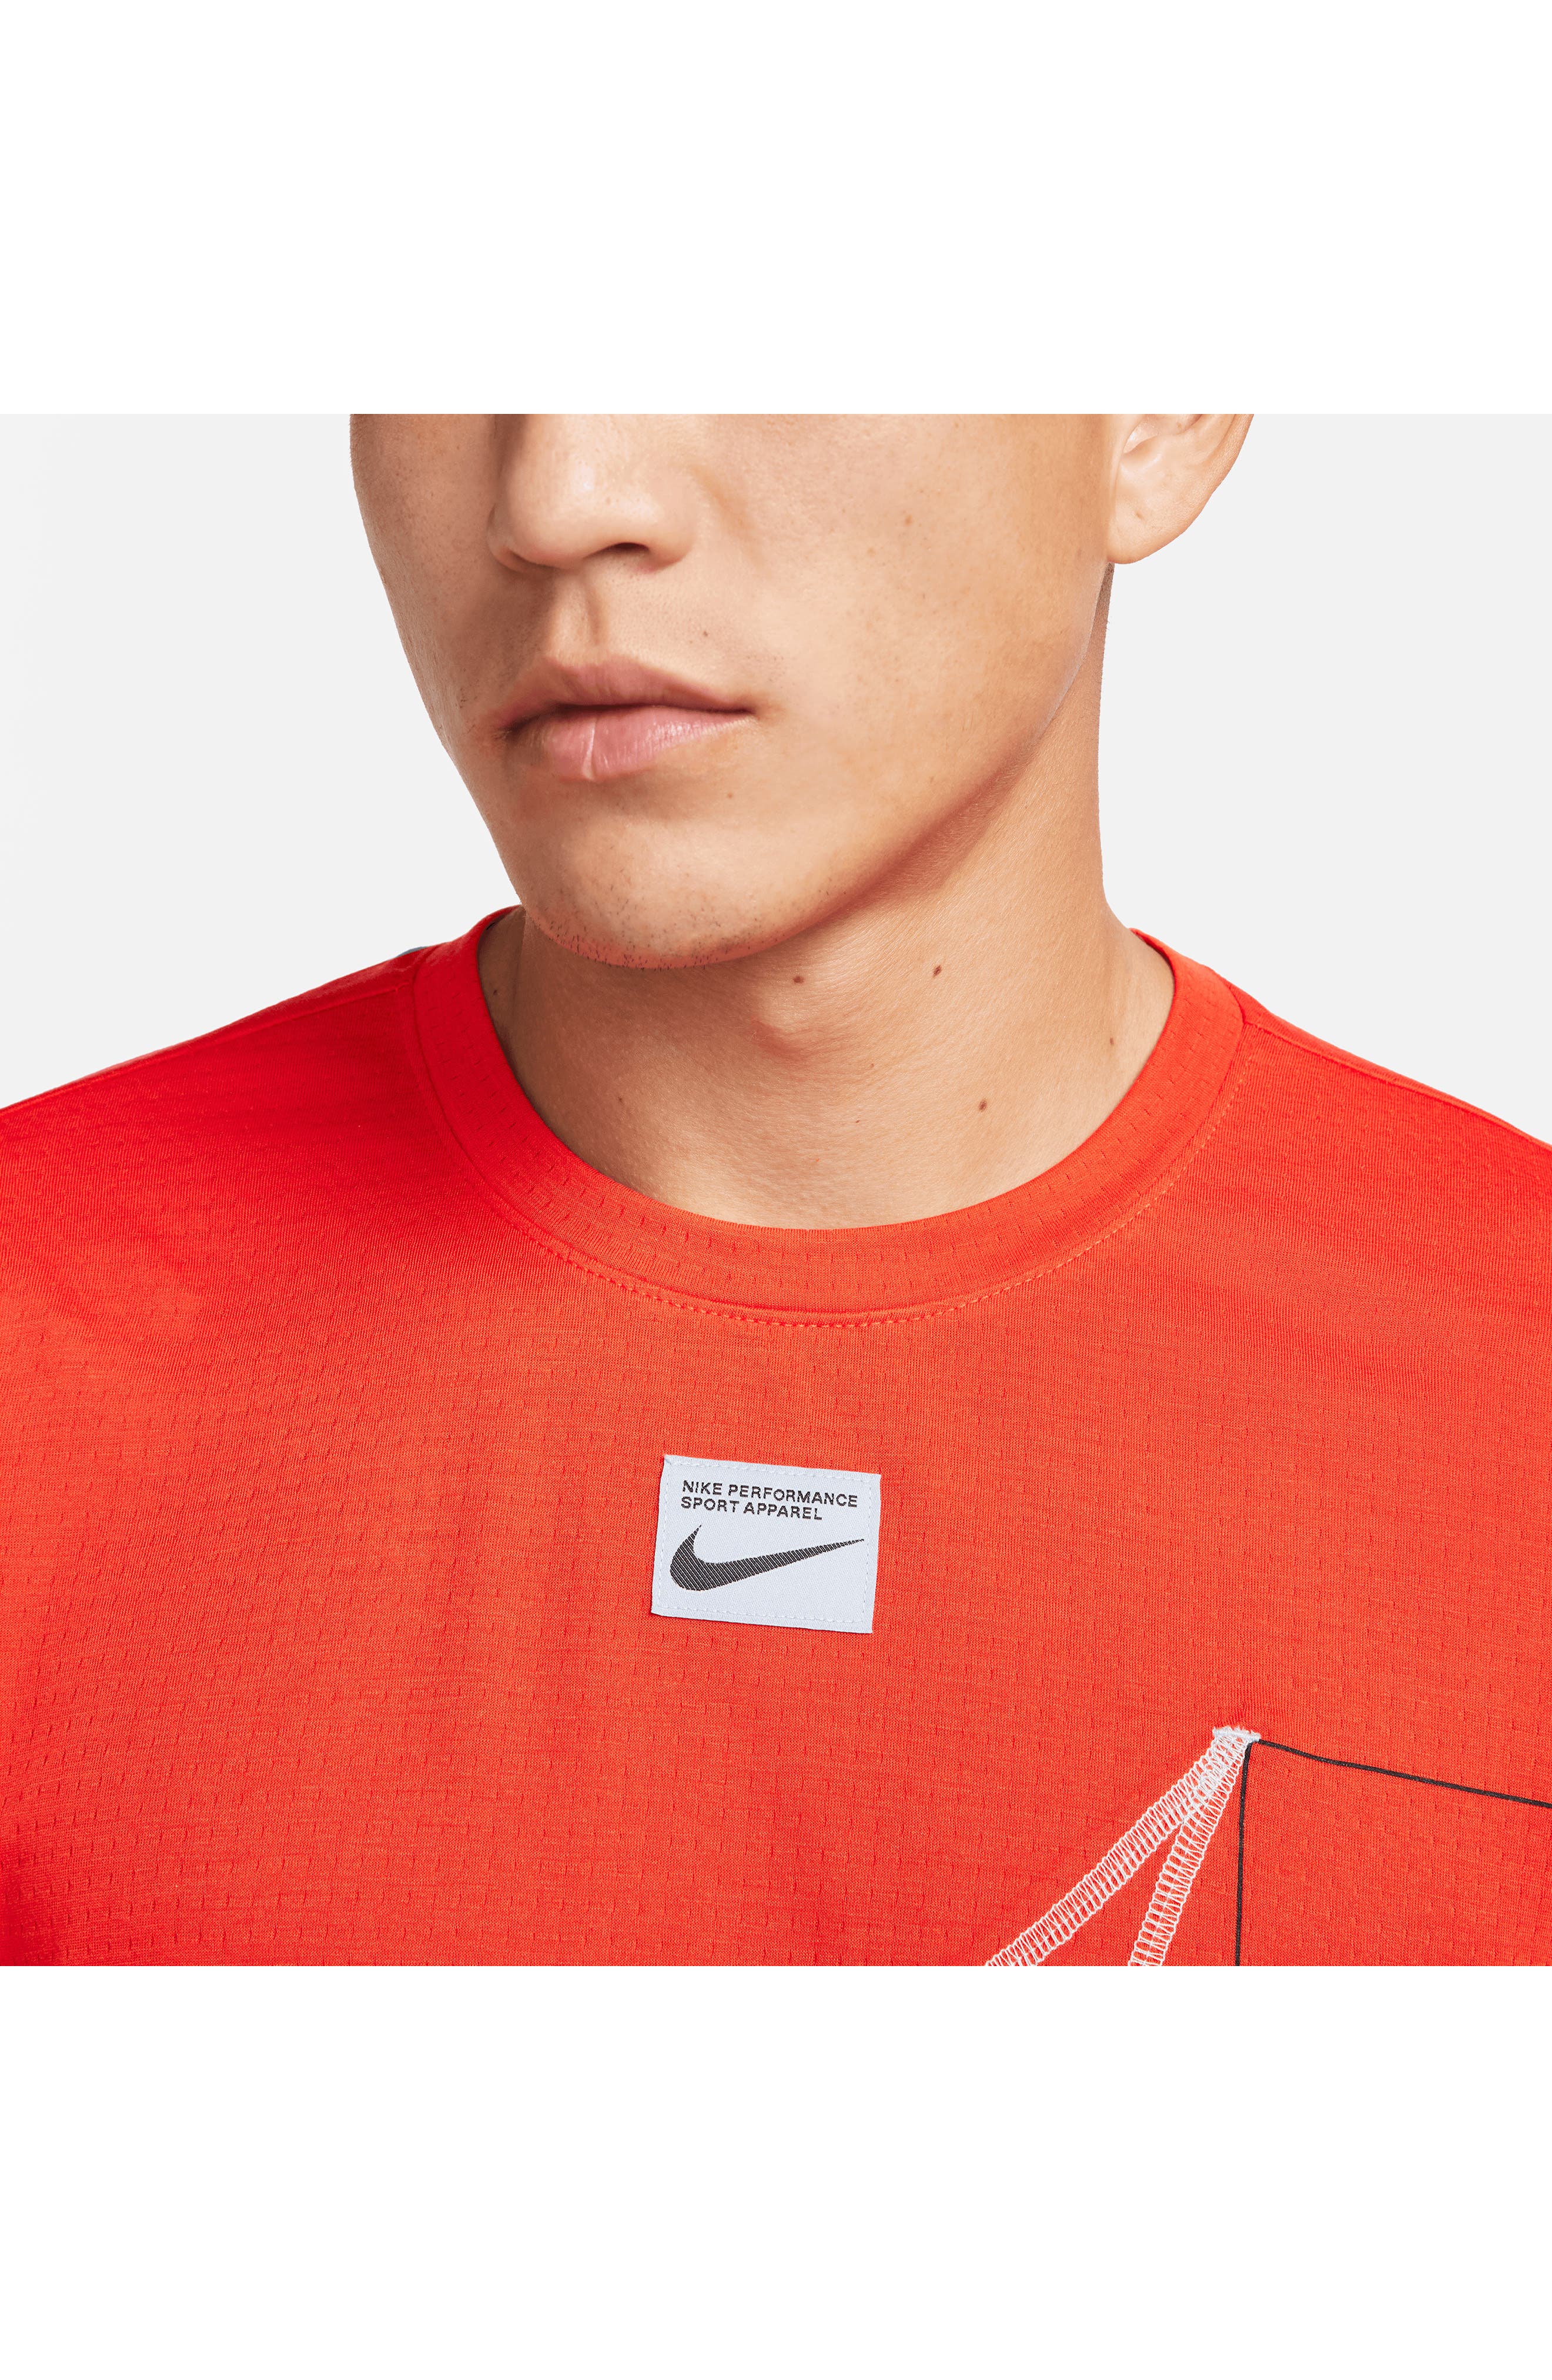 Nike Picante in Fitness | Whisper Smart Q5 Red/Blue T-Shirt Dri-FIT Closet